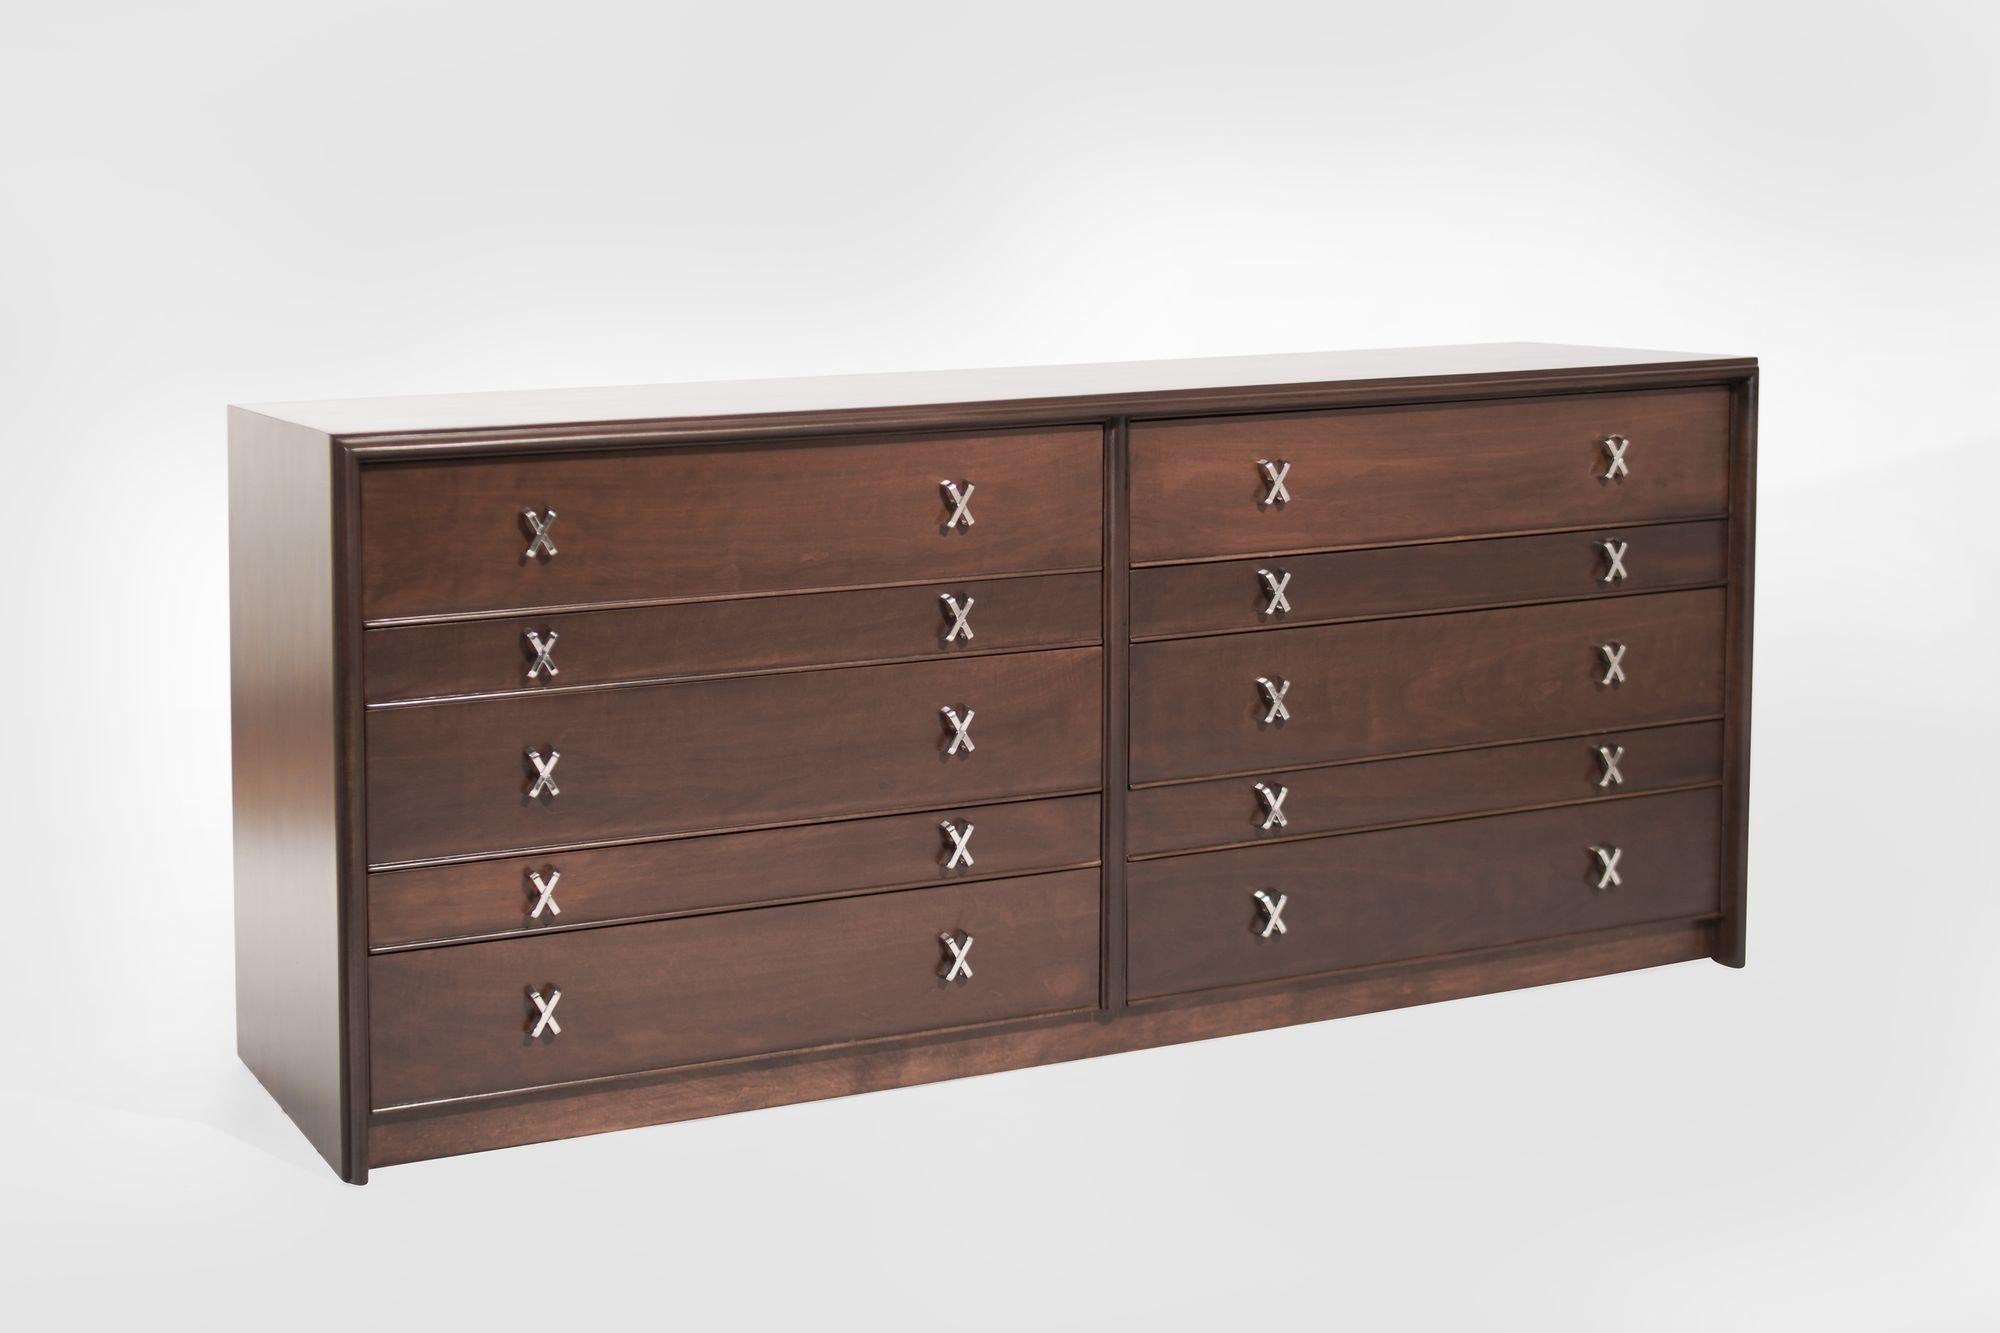 A meticulously restored Paul Frankl Dresser from Johnson Furniture, a mid-century masterpiece circa 1950s. This vintage gem, designed by the iconic Paul Frankl, features 10 drawers adorned with X-shaped nickel hardware, meticulously revived to its